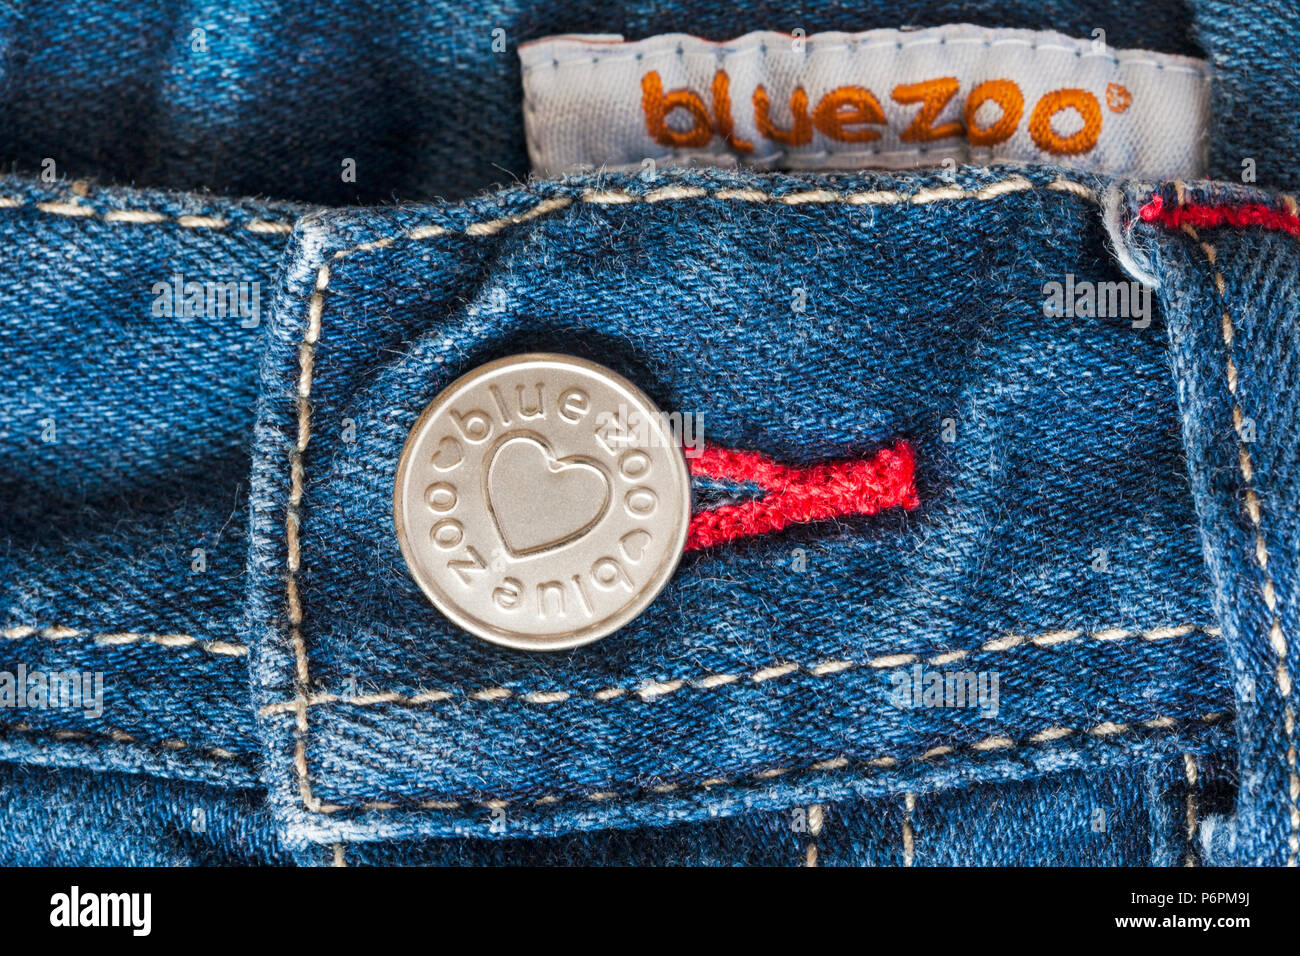 Blue zoo button and blue label in denim jeans Stock - Alamy